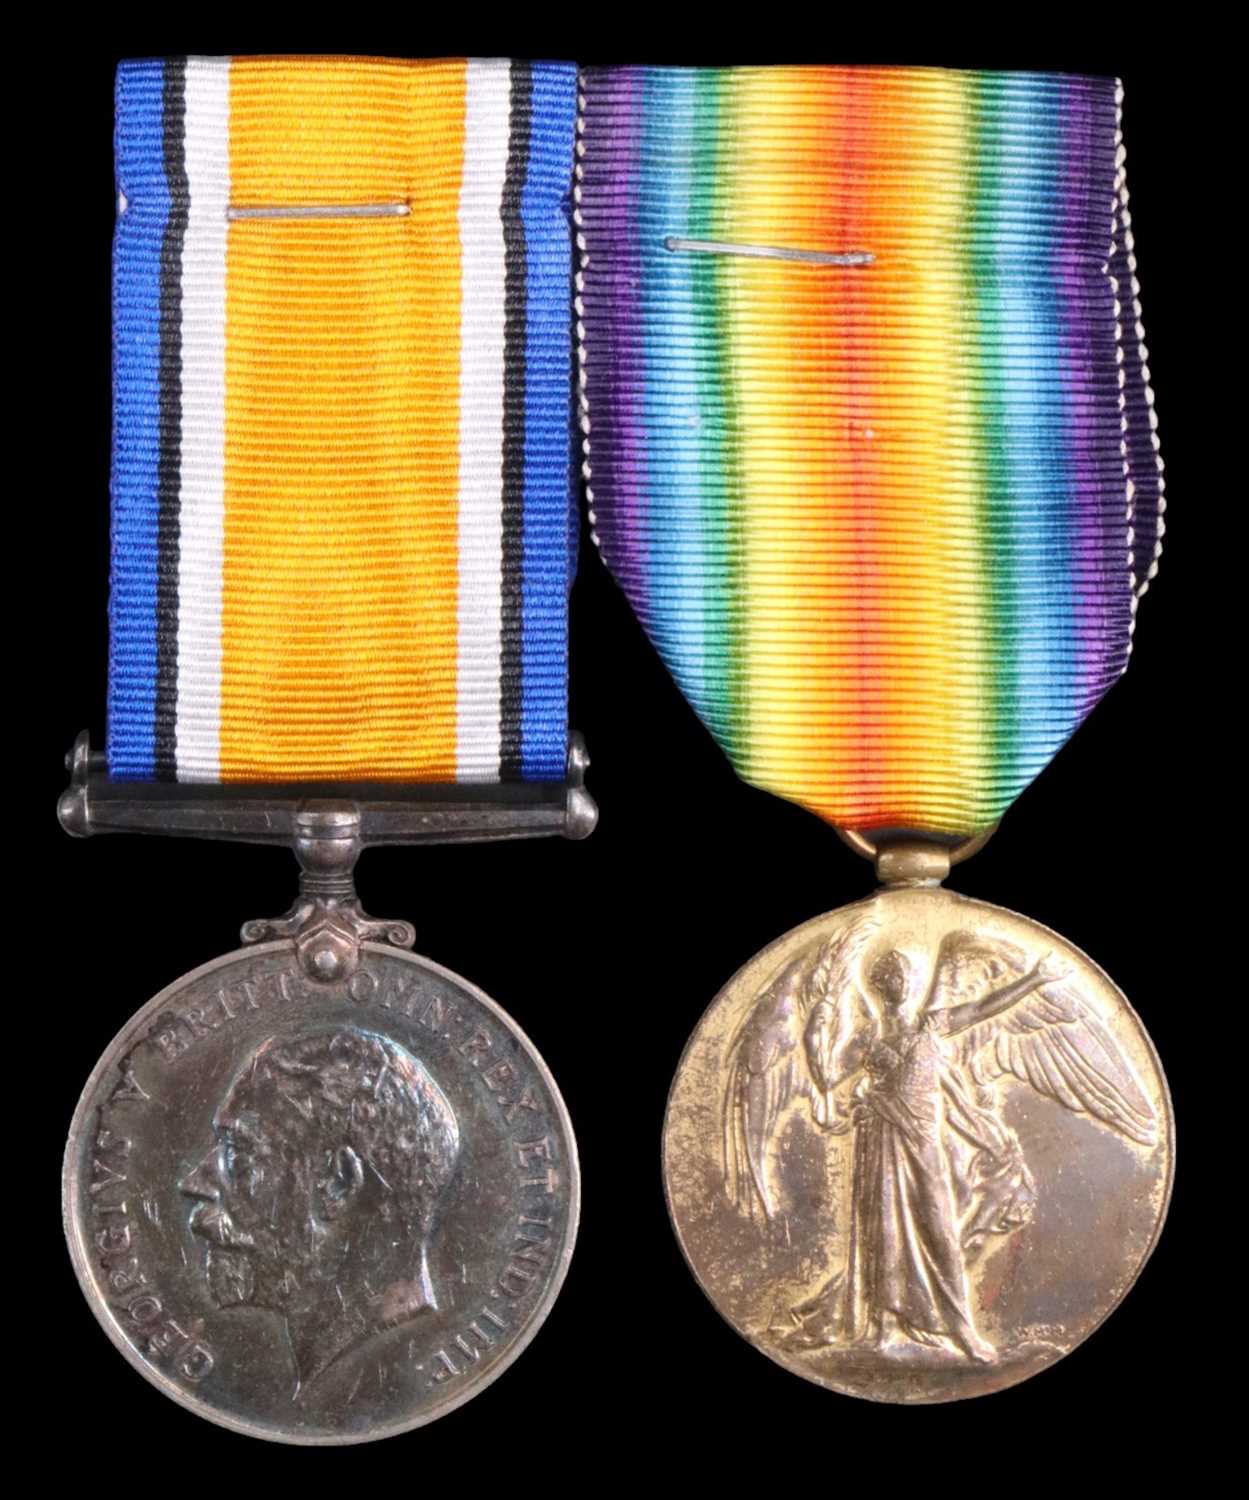 British War and Victory medals to 19496 Pte G G Robson, Border Regiment